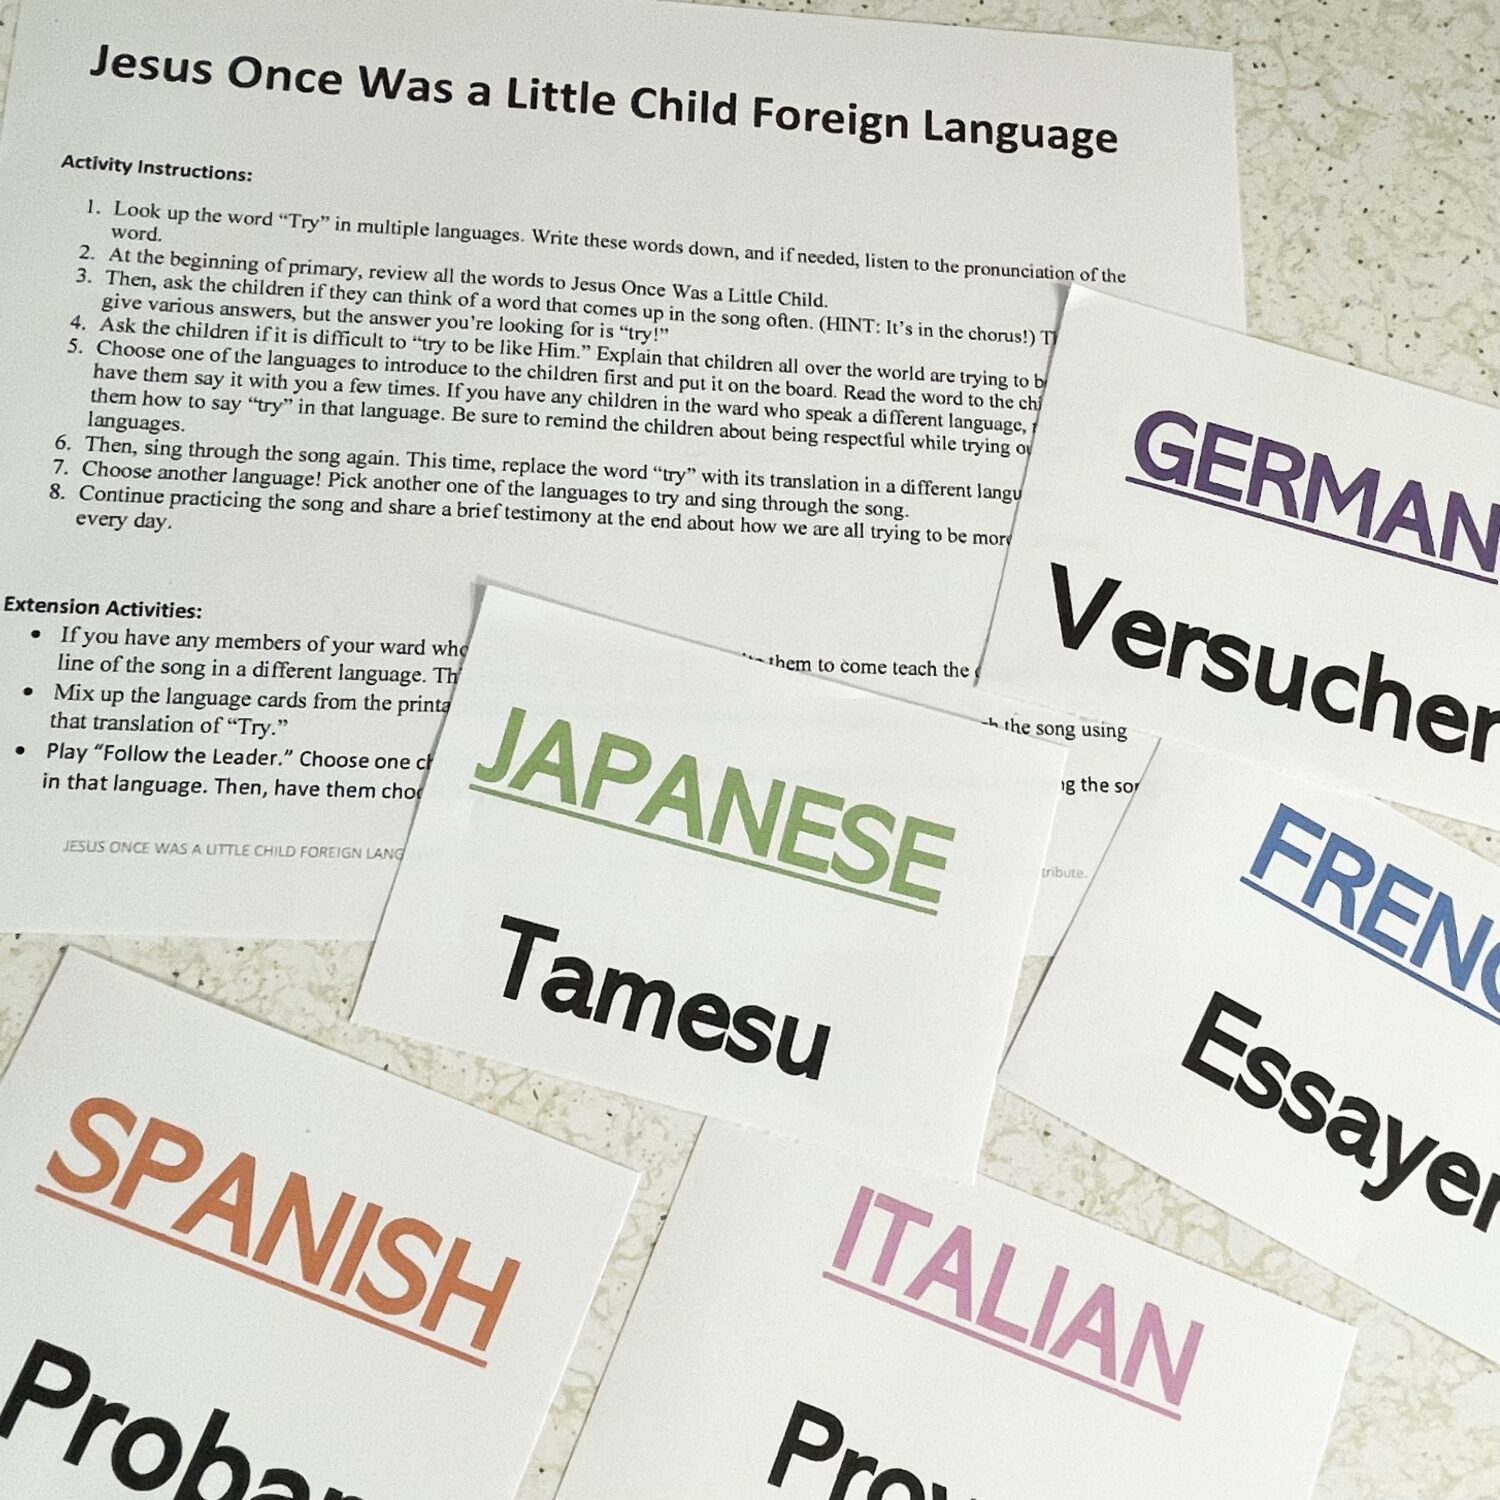 Fun Jesus Once Was a Little Child Foreign Language primary singing time idea learn how to sing in 8 different languages with this word game for LDS Primary Music Leaders teaching Come Follow Me New Testament.